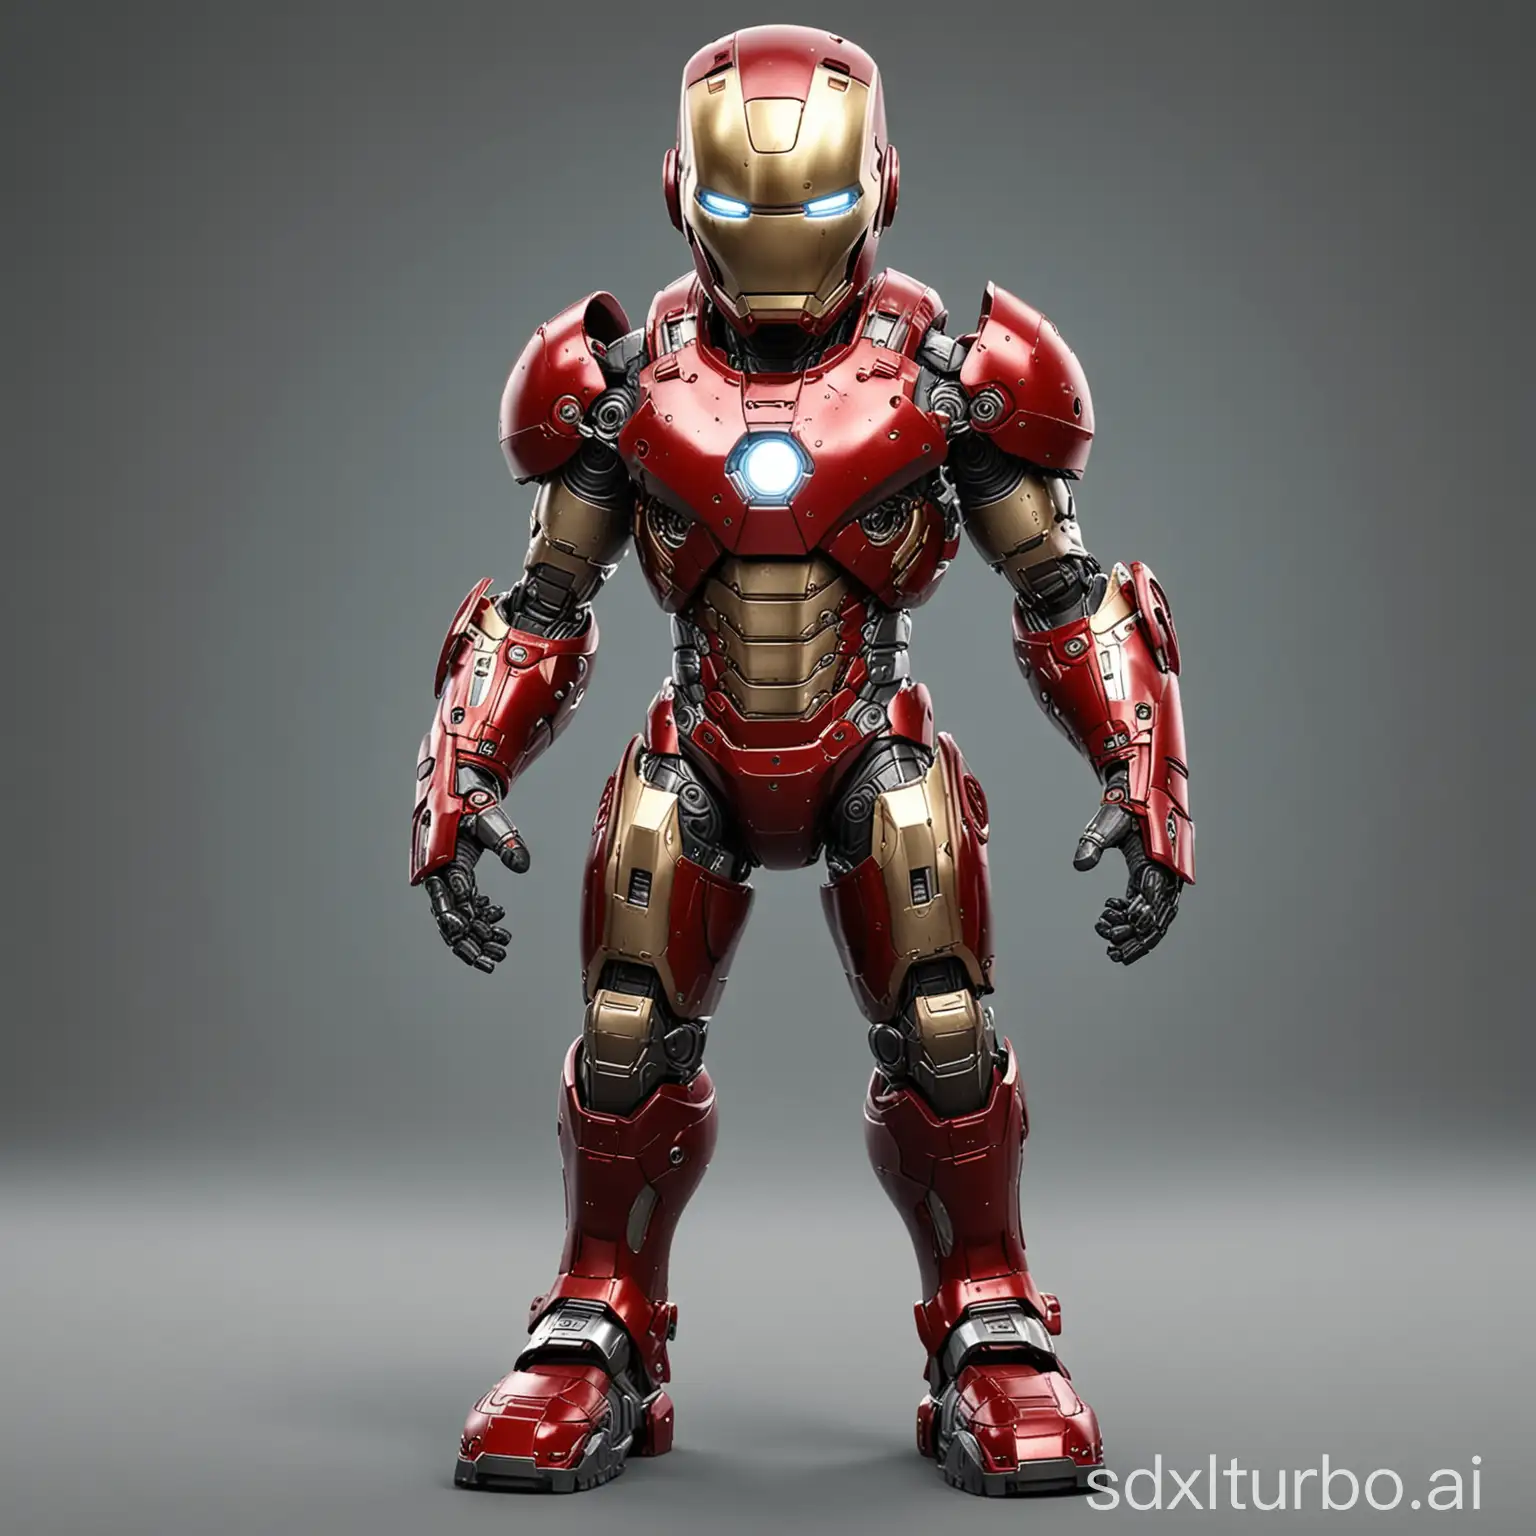 Little child cyborg ironman full armor, game character, stands at full height